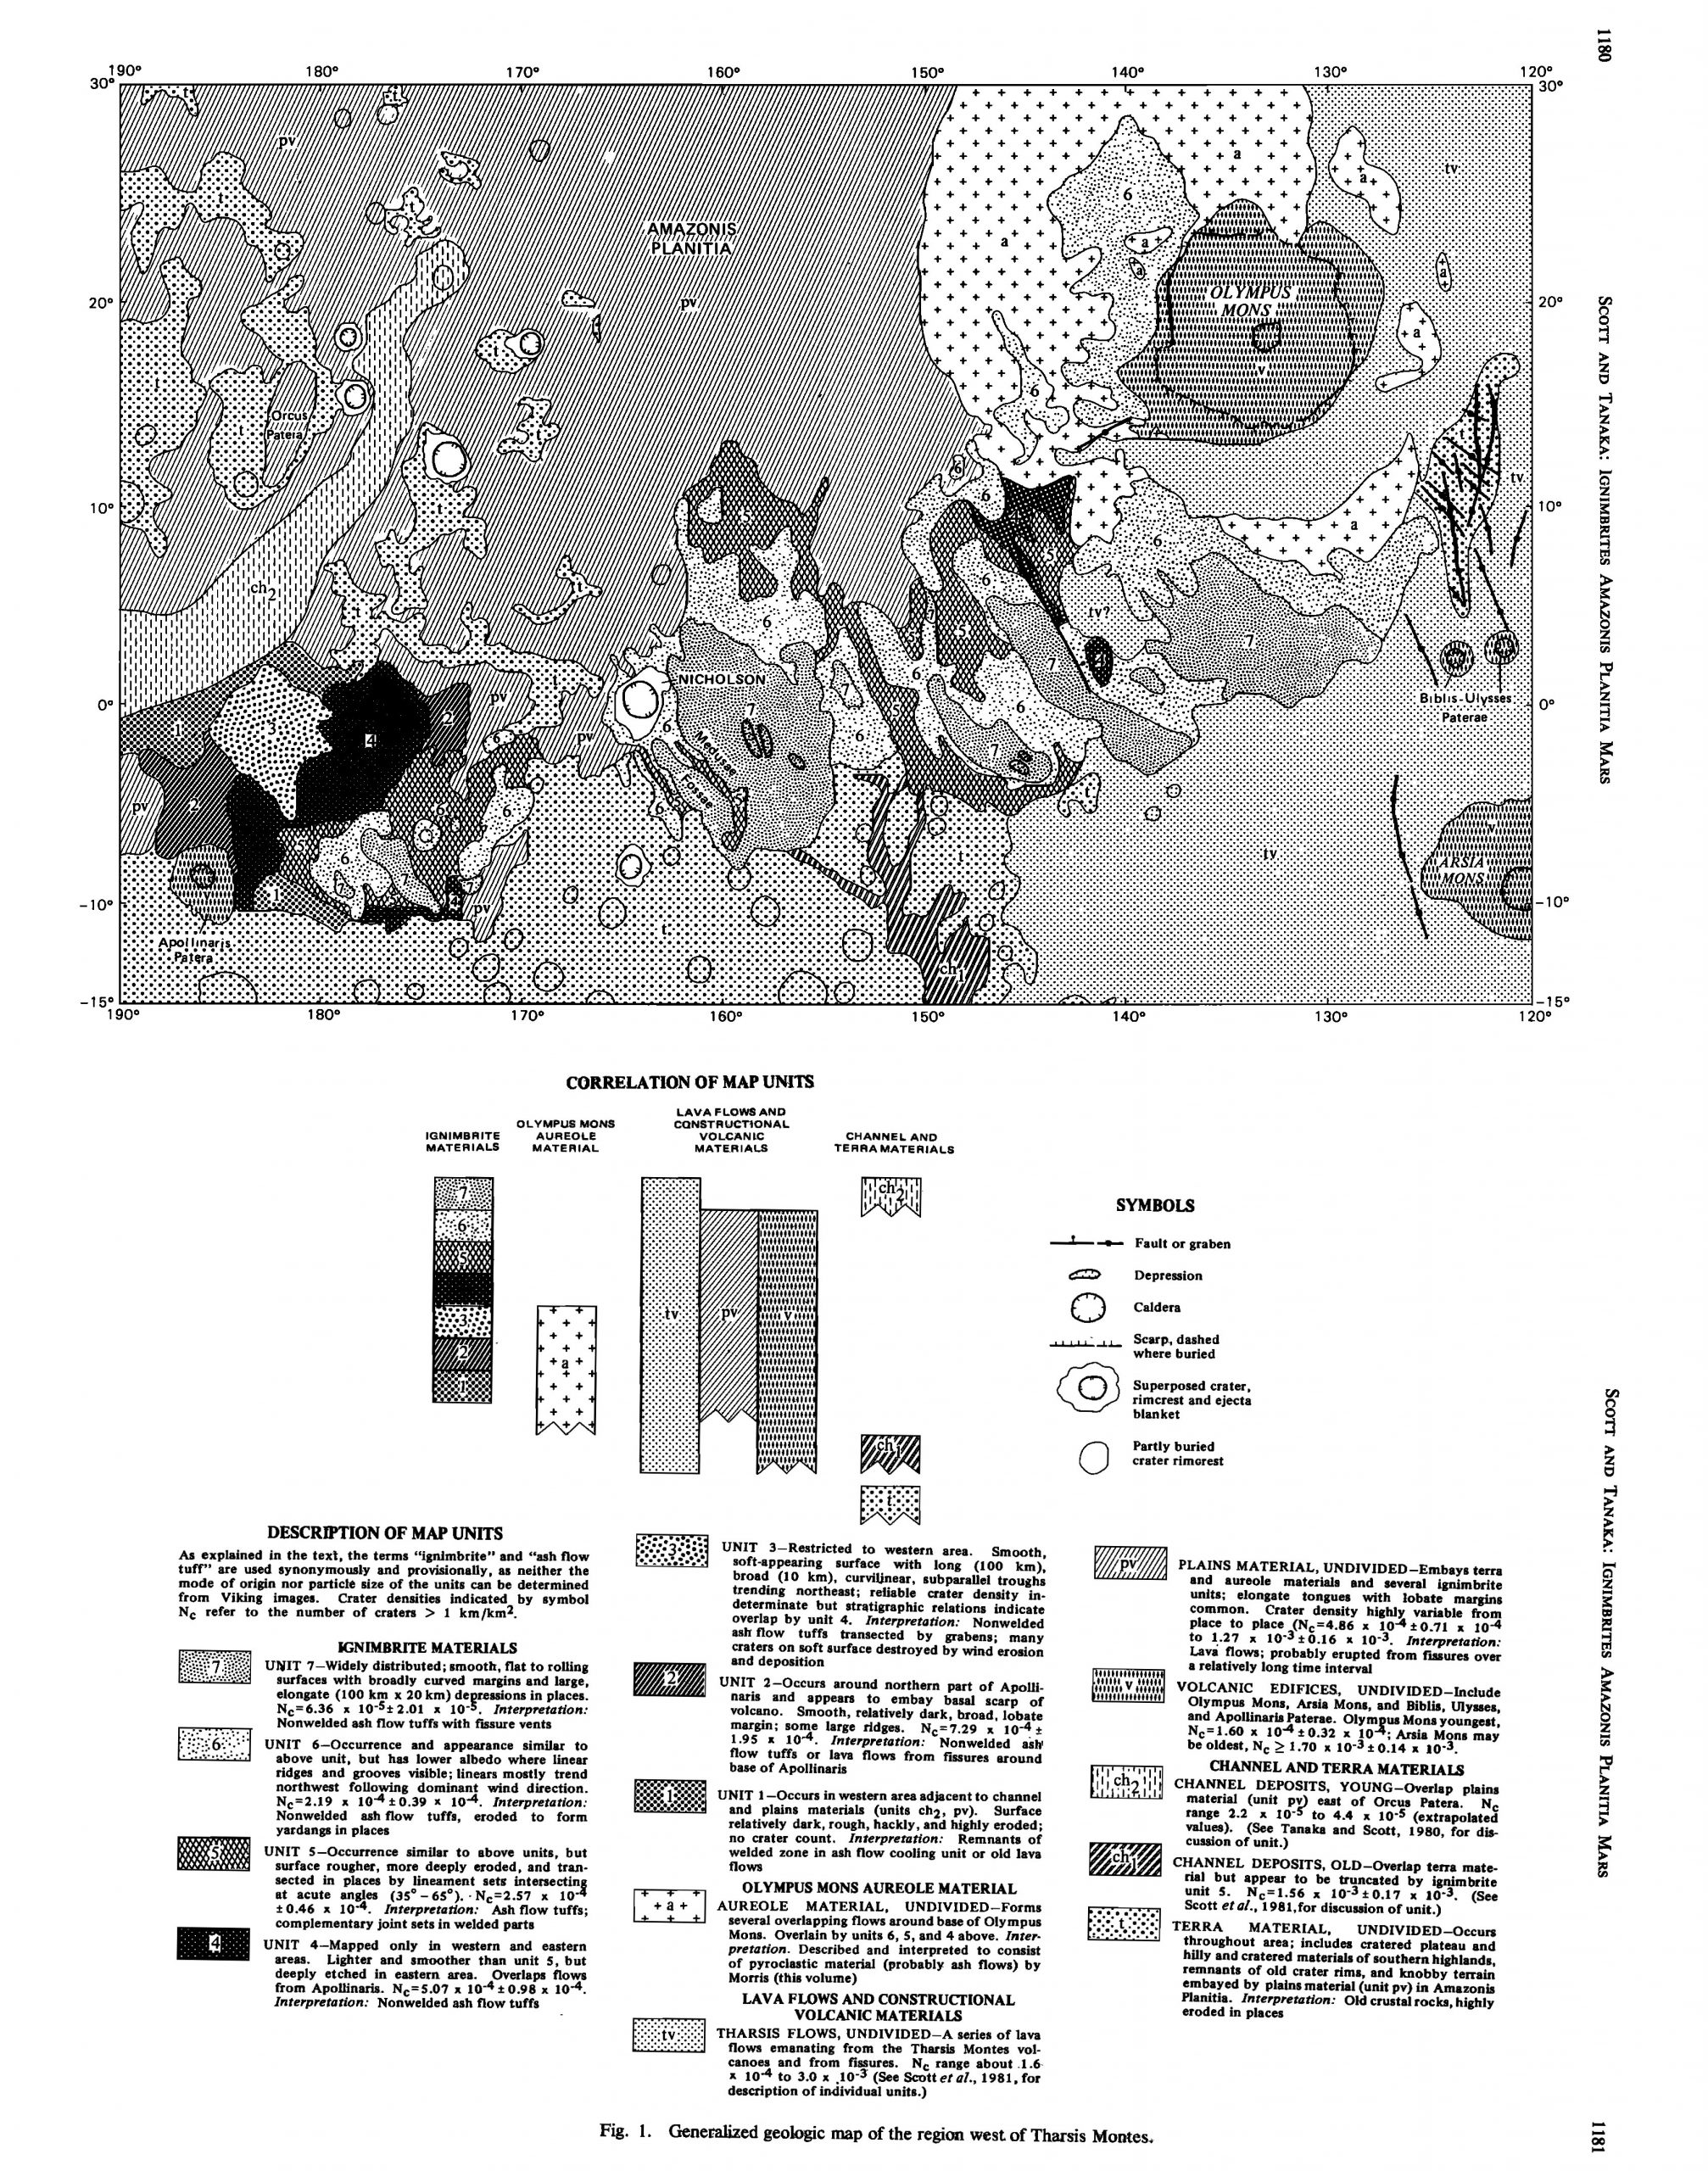 Generalized geologic map of the region West of Tharsis Montes